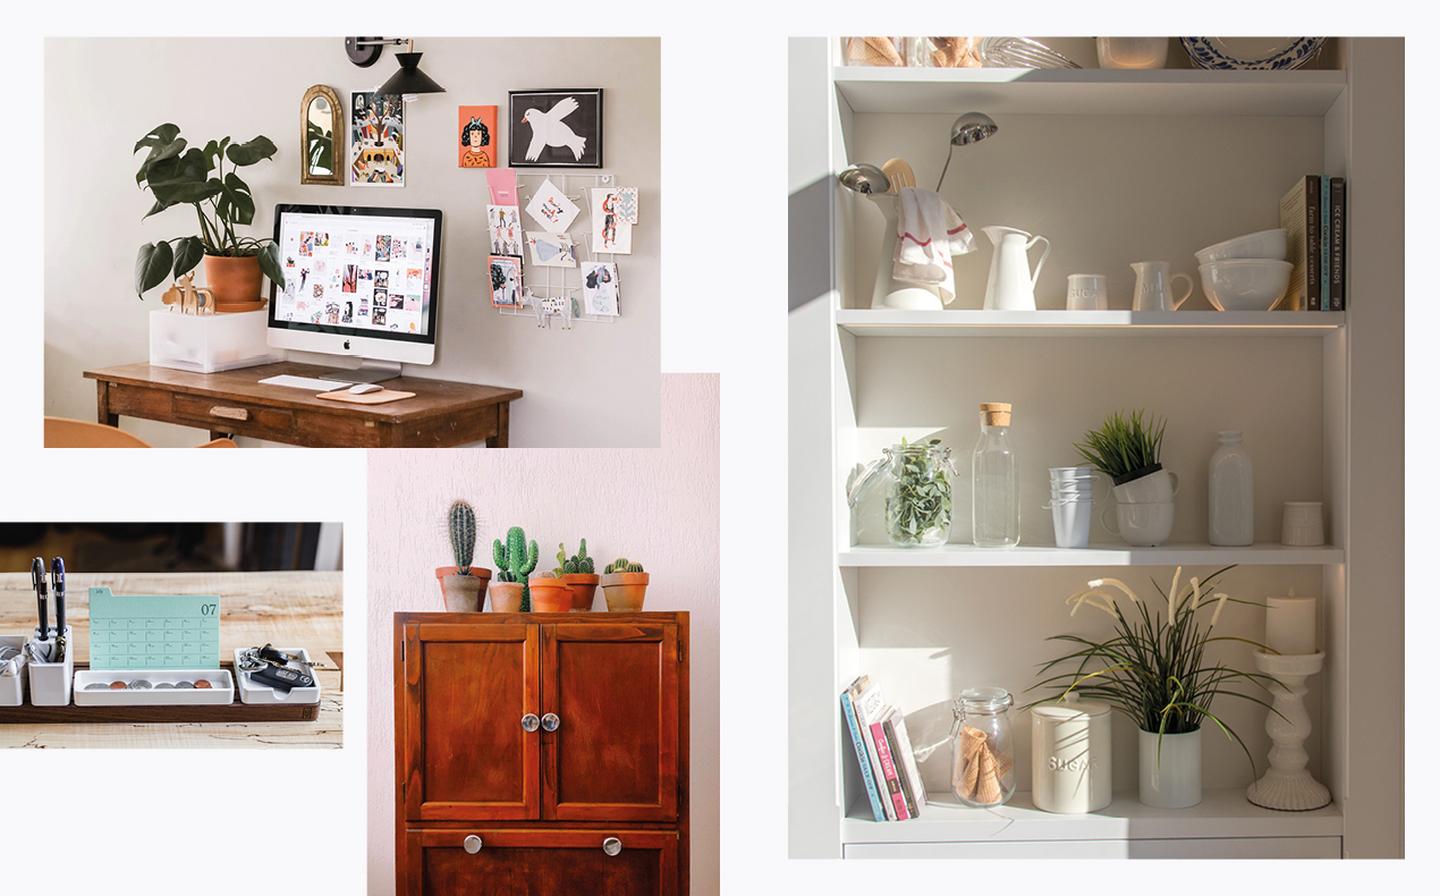 A montage of clear desk spaces, with all clutter tidied away and ornaments neatly positioned